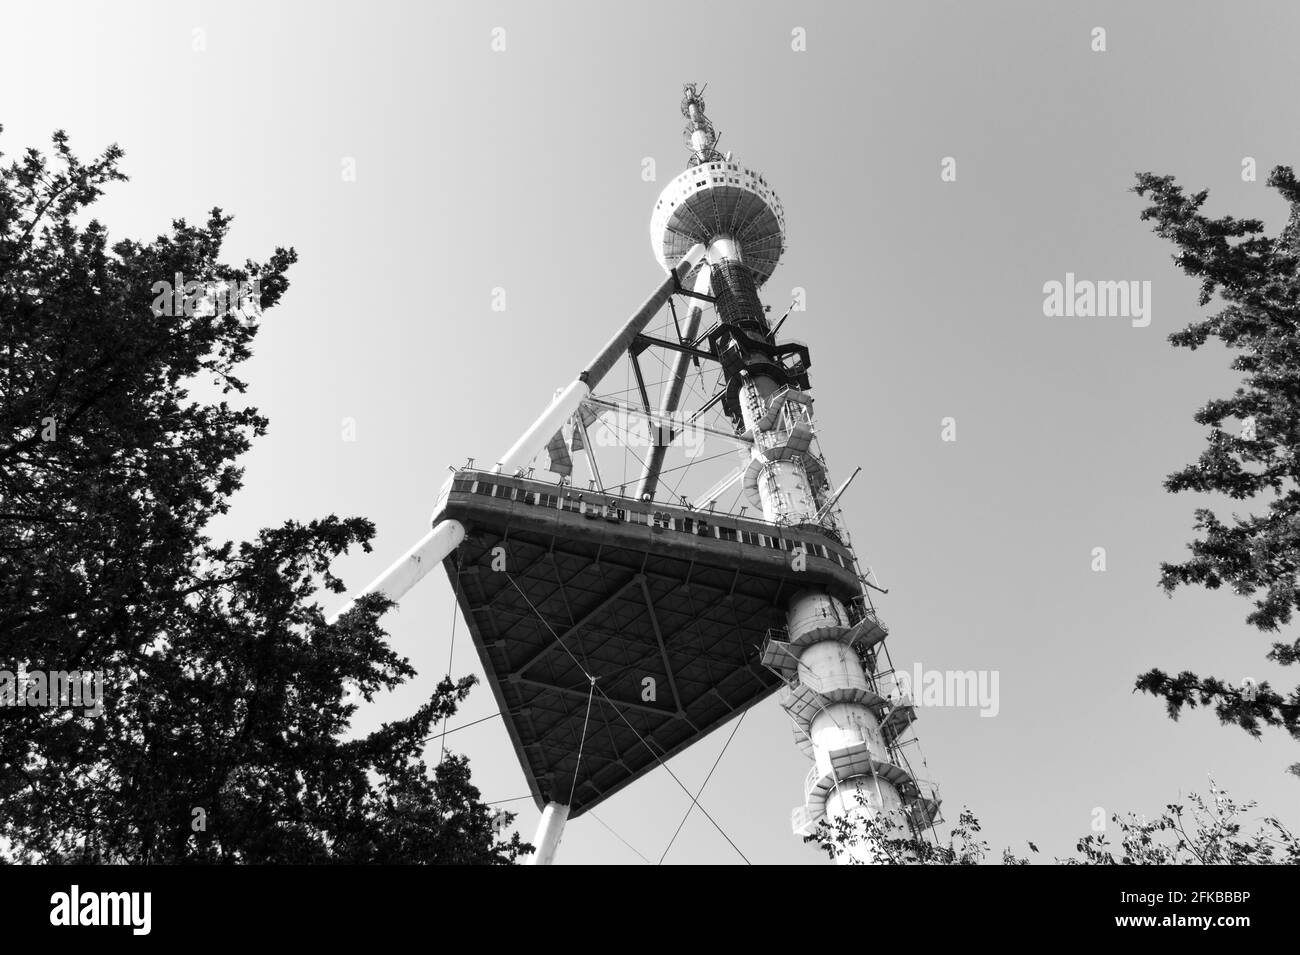 Tbilisi, Georgia - August 22, 2016: Tbilisi TV Broadcasting Tower in black and white Stock Photo